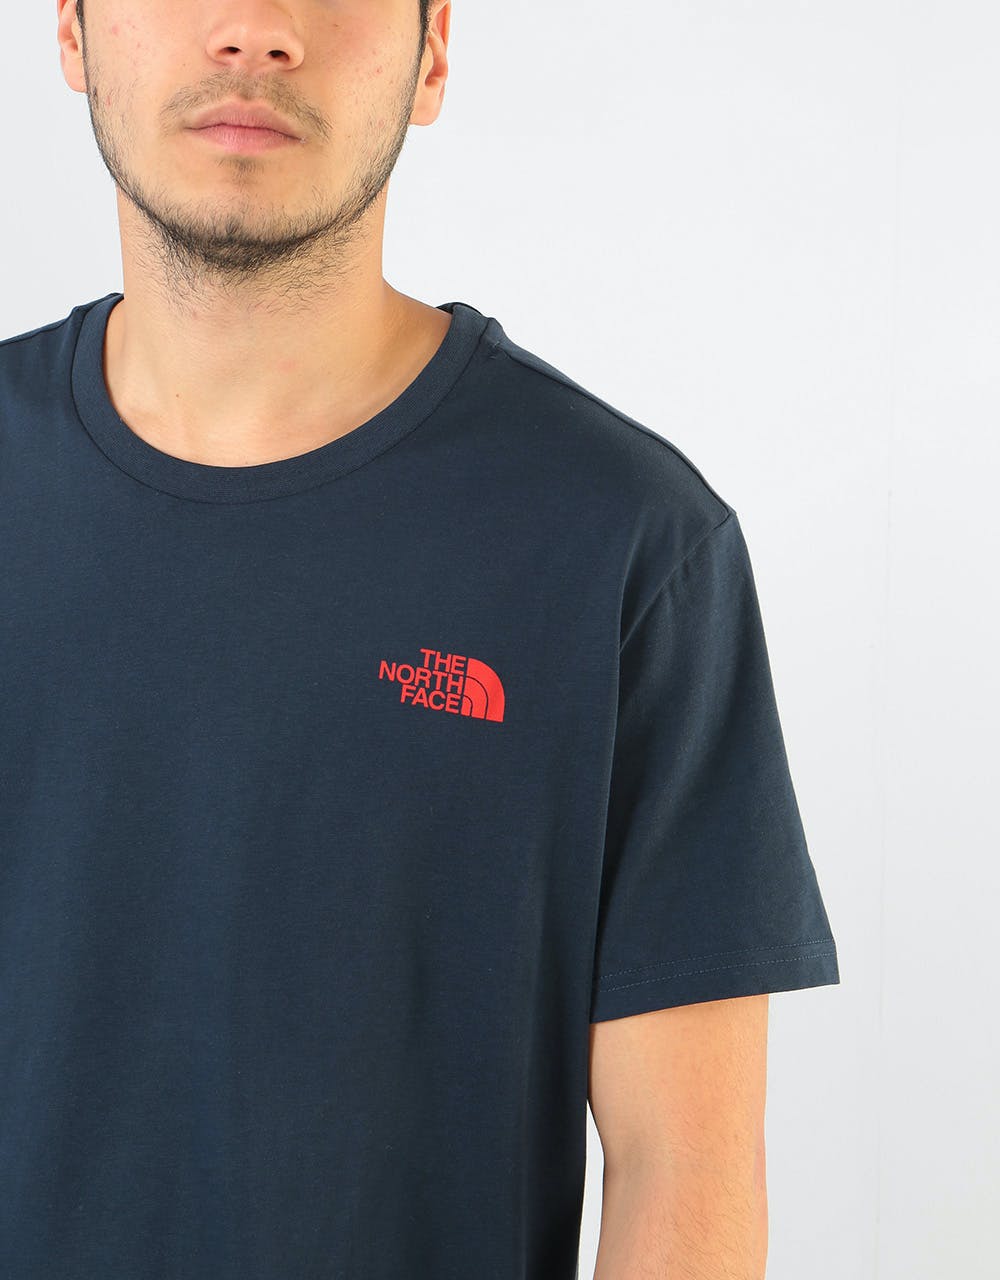 The North Face S/S Simple Dome T-Shirt - Urban Navy/Fiery Red